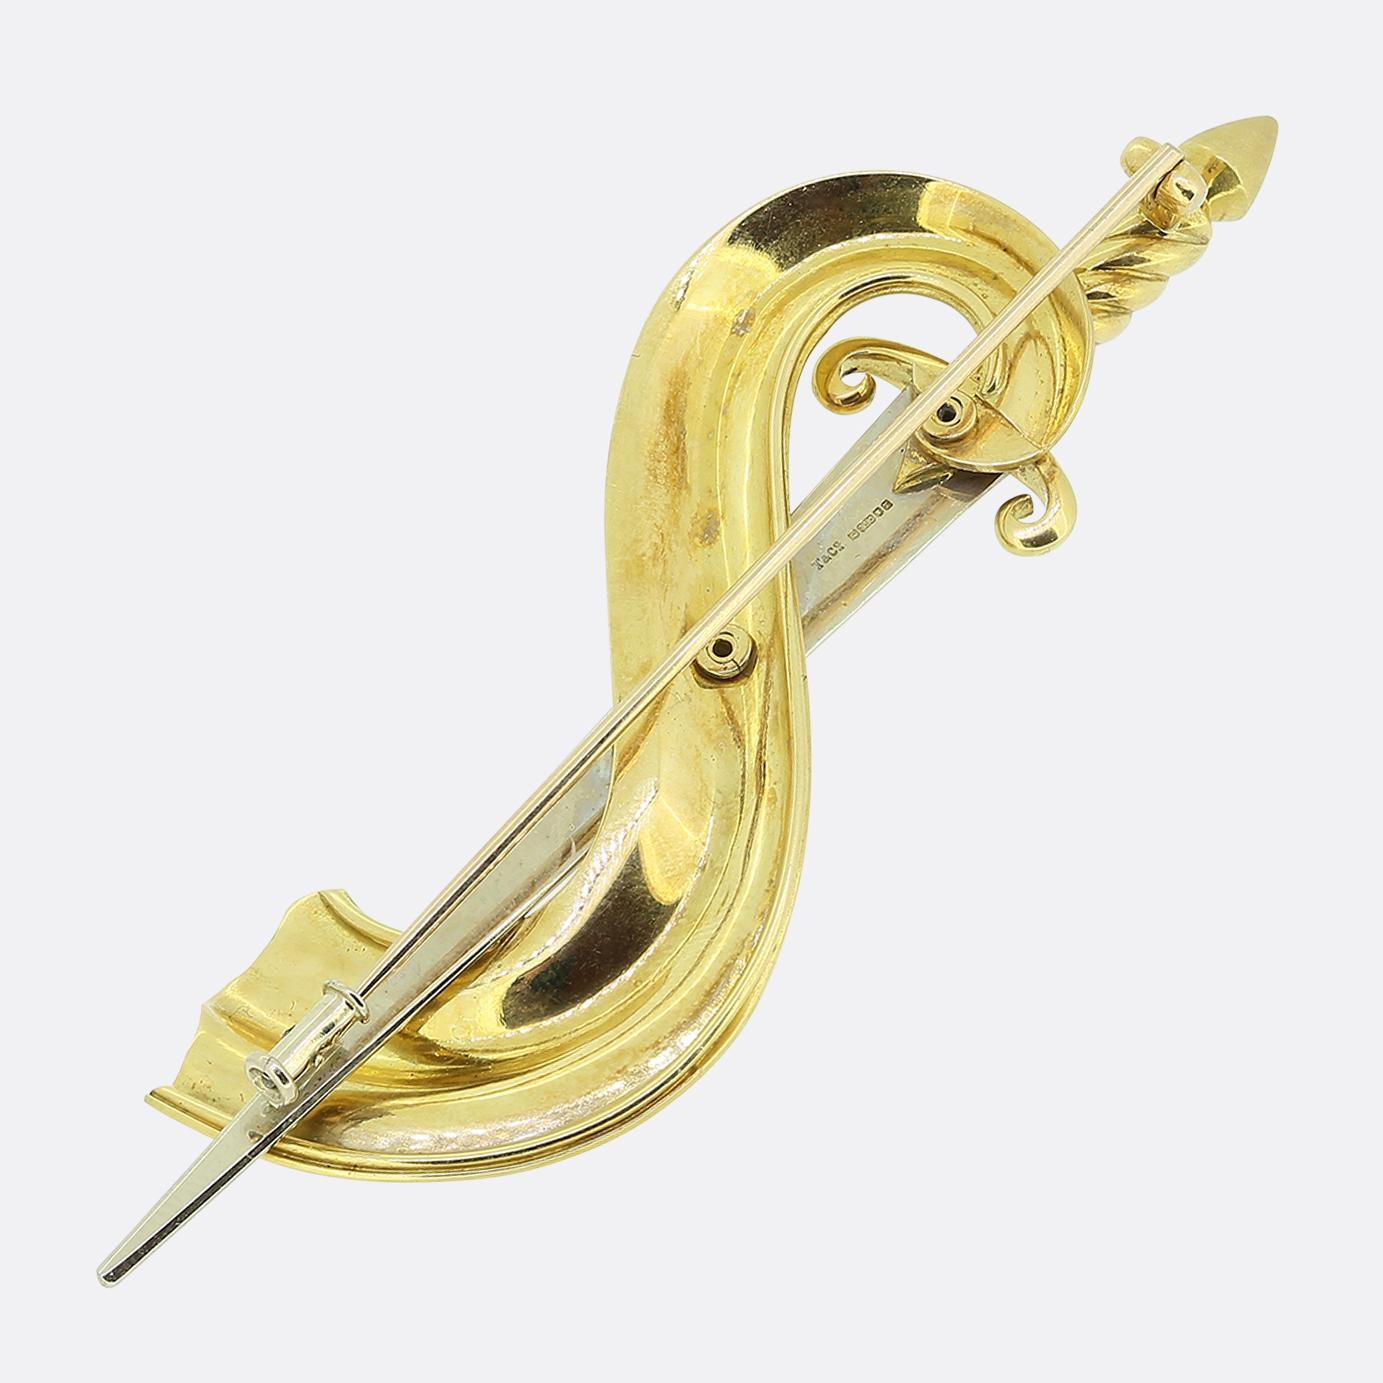 Here we have a lovely vintage brooch by the luxury jewellery designer Tiffany & Co. This piece has been crafted from 18ct gold into the shape of a sword from days of old. A ribbed yellow gold handle leads to a white gold blade which in turn strikes